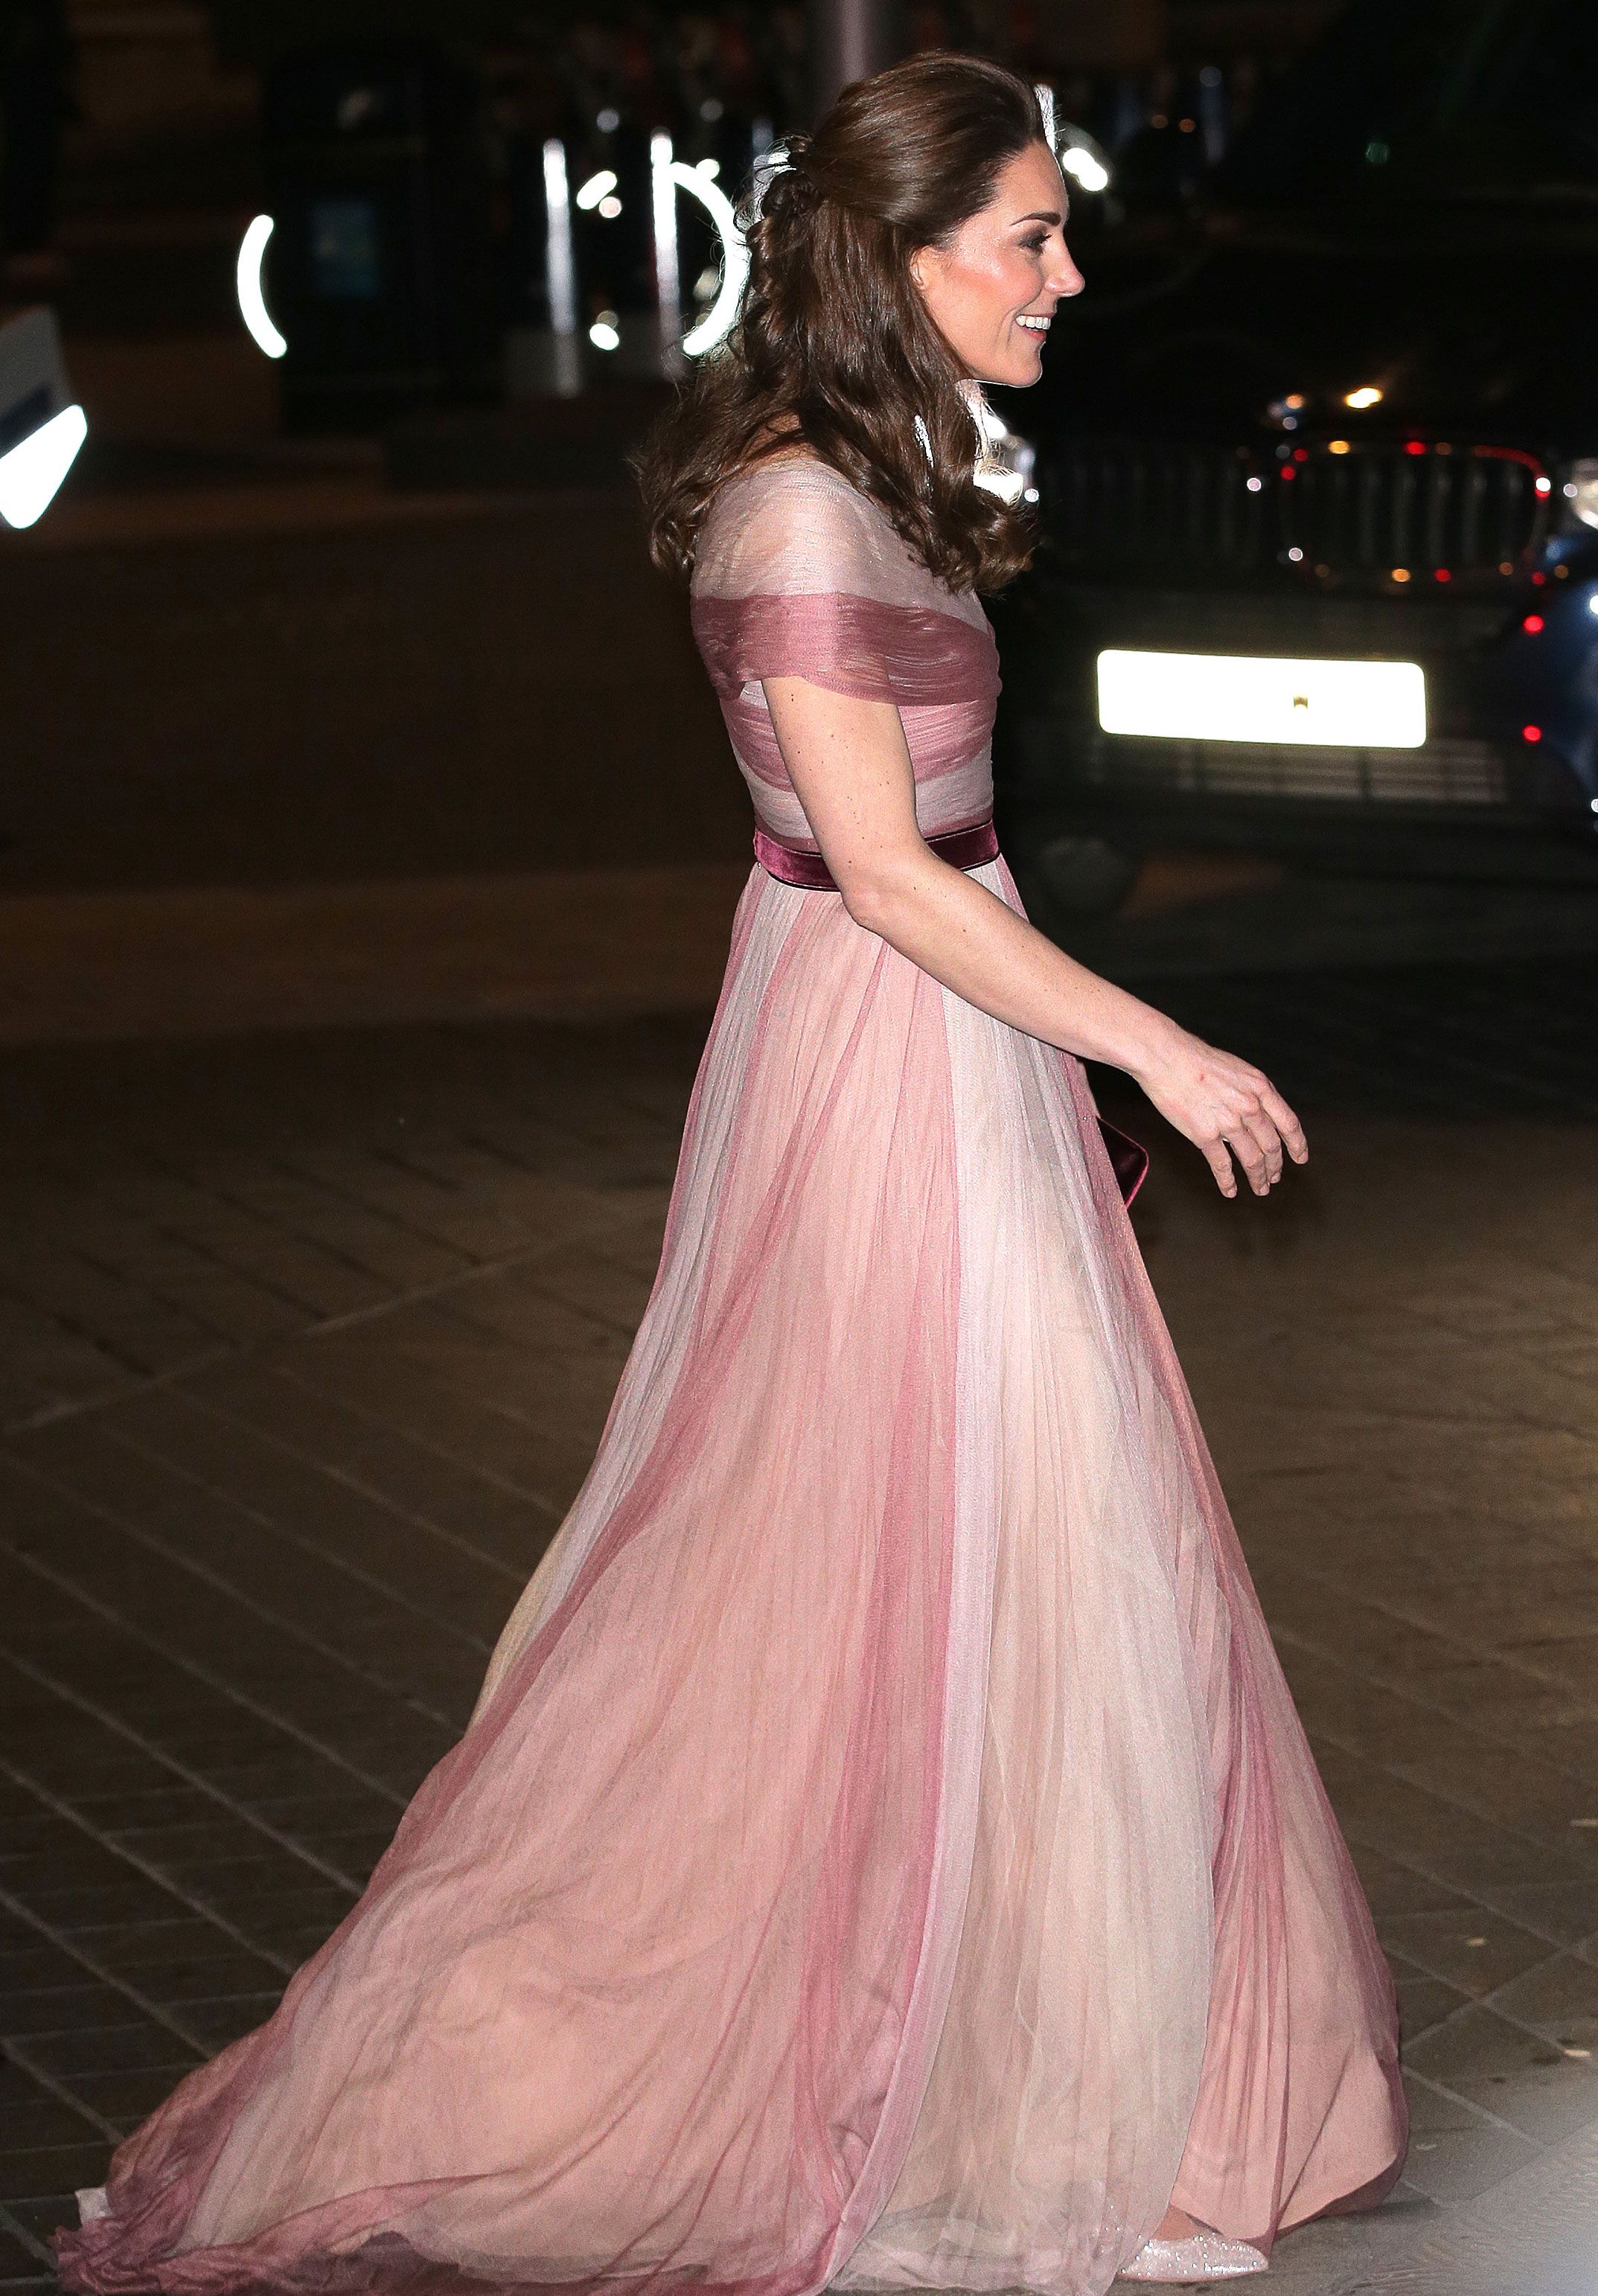 Kate Middleton wore a Gucci dress to a gala dinner and looked